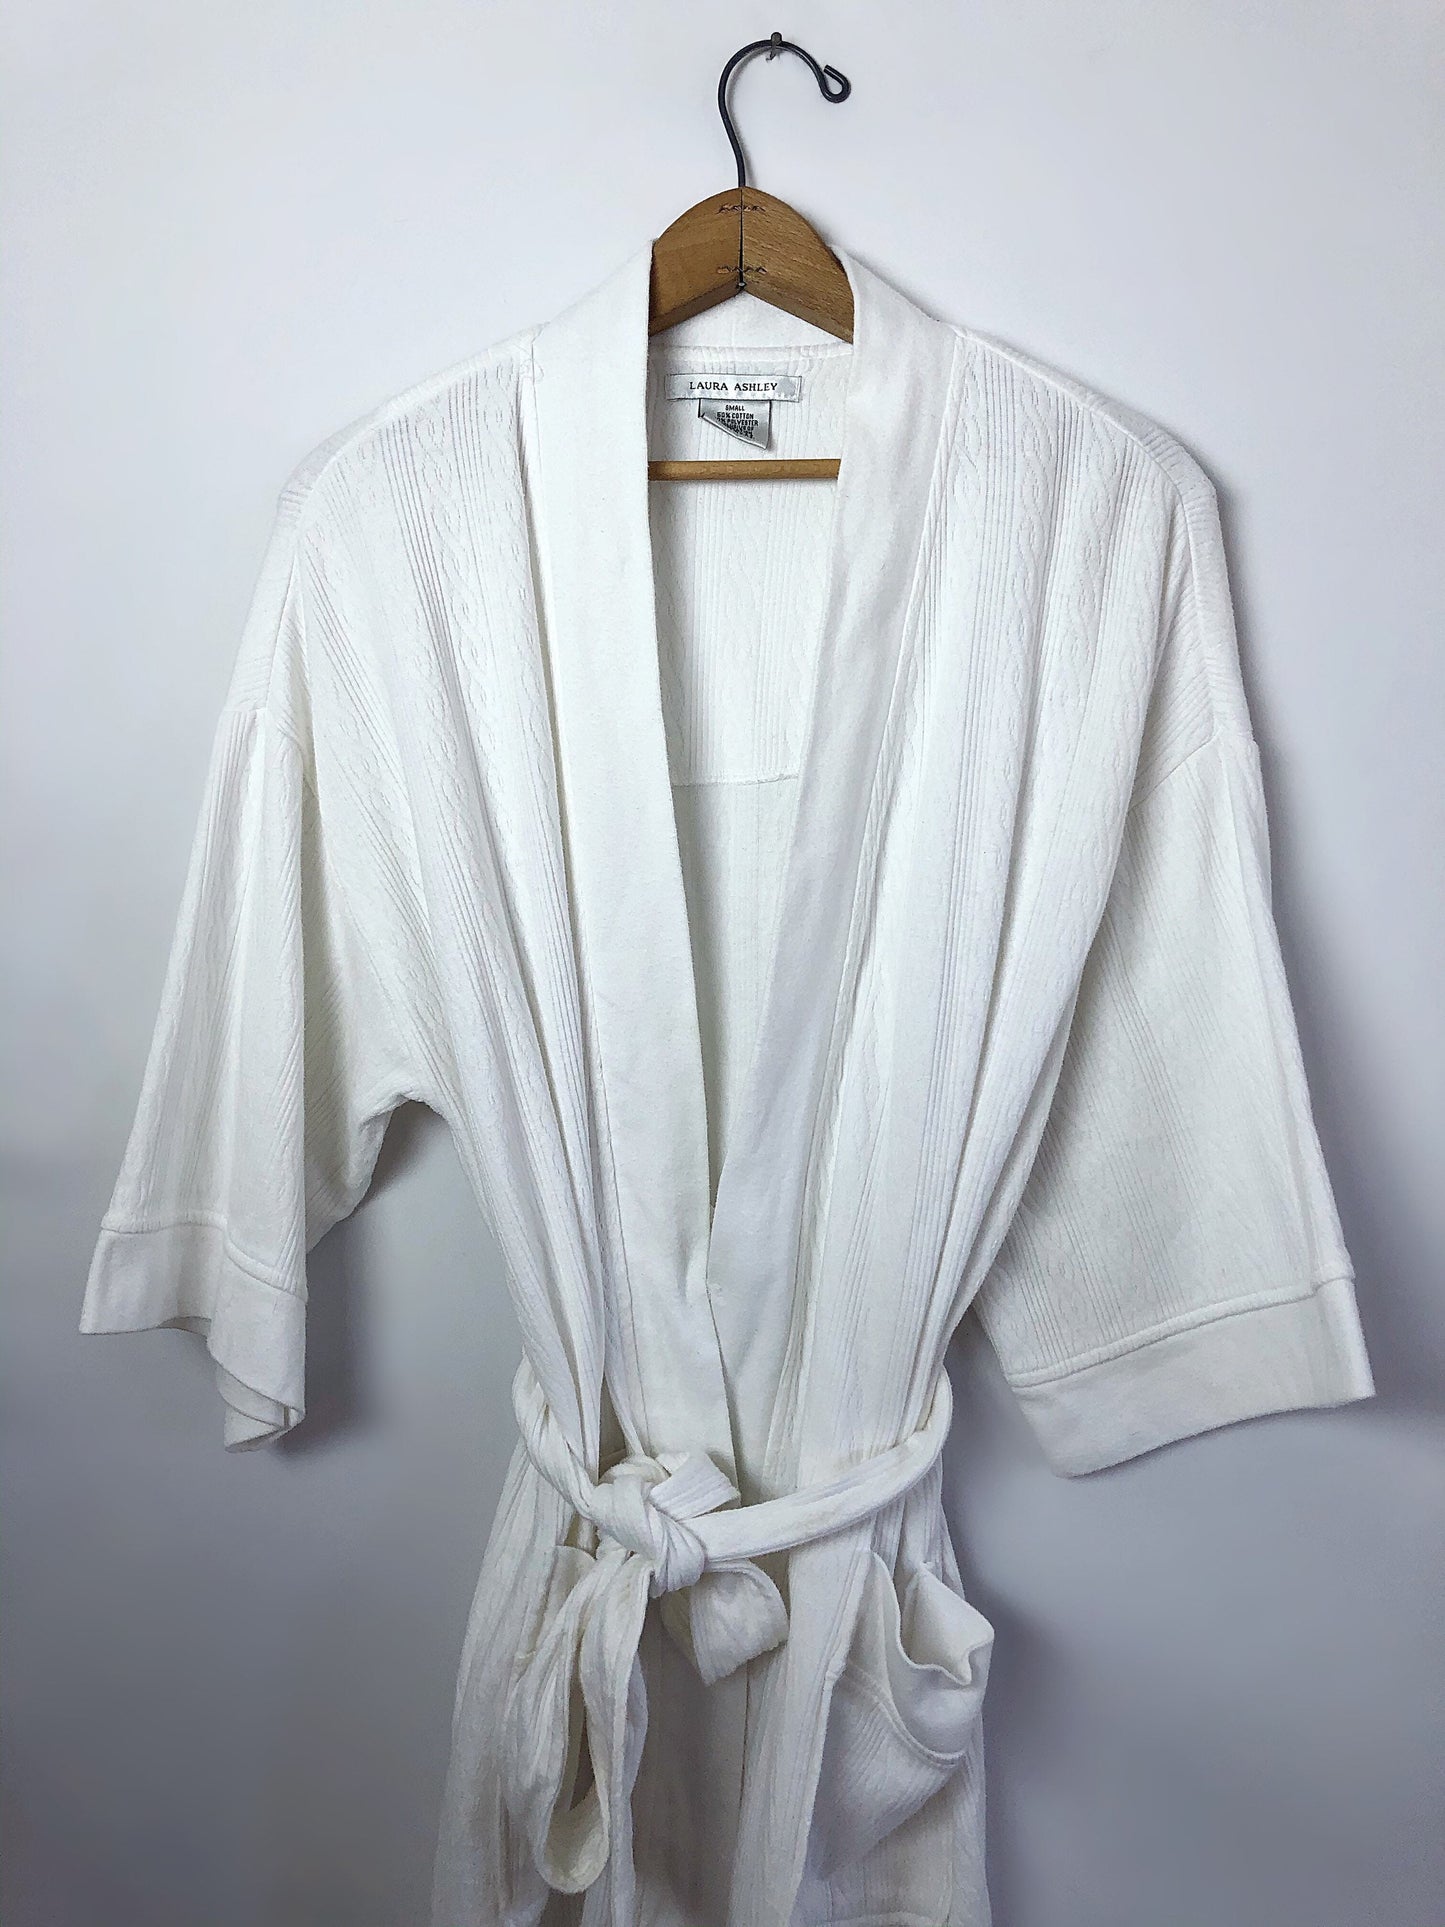 Vintage 90’s Laura Ashley White Spa Short Robe with Pockets Wms Size Small